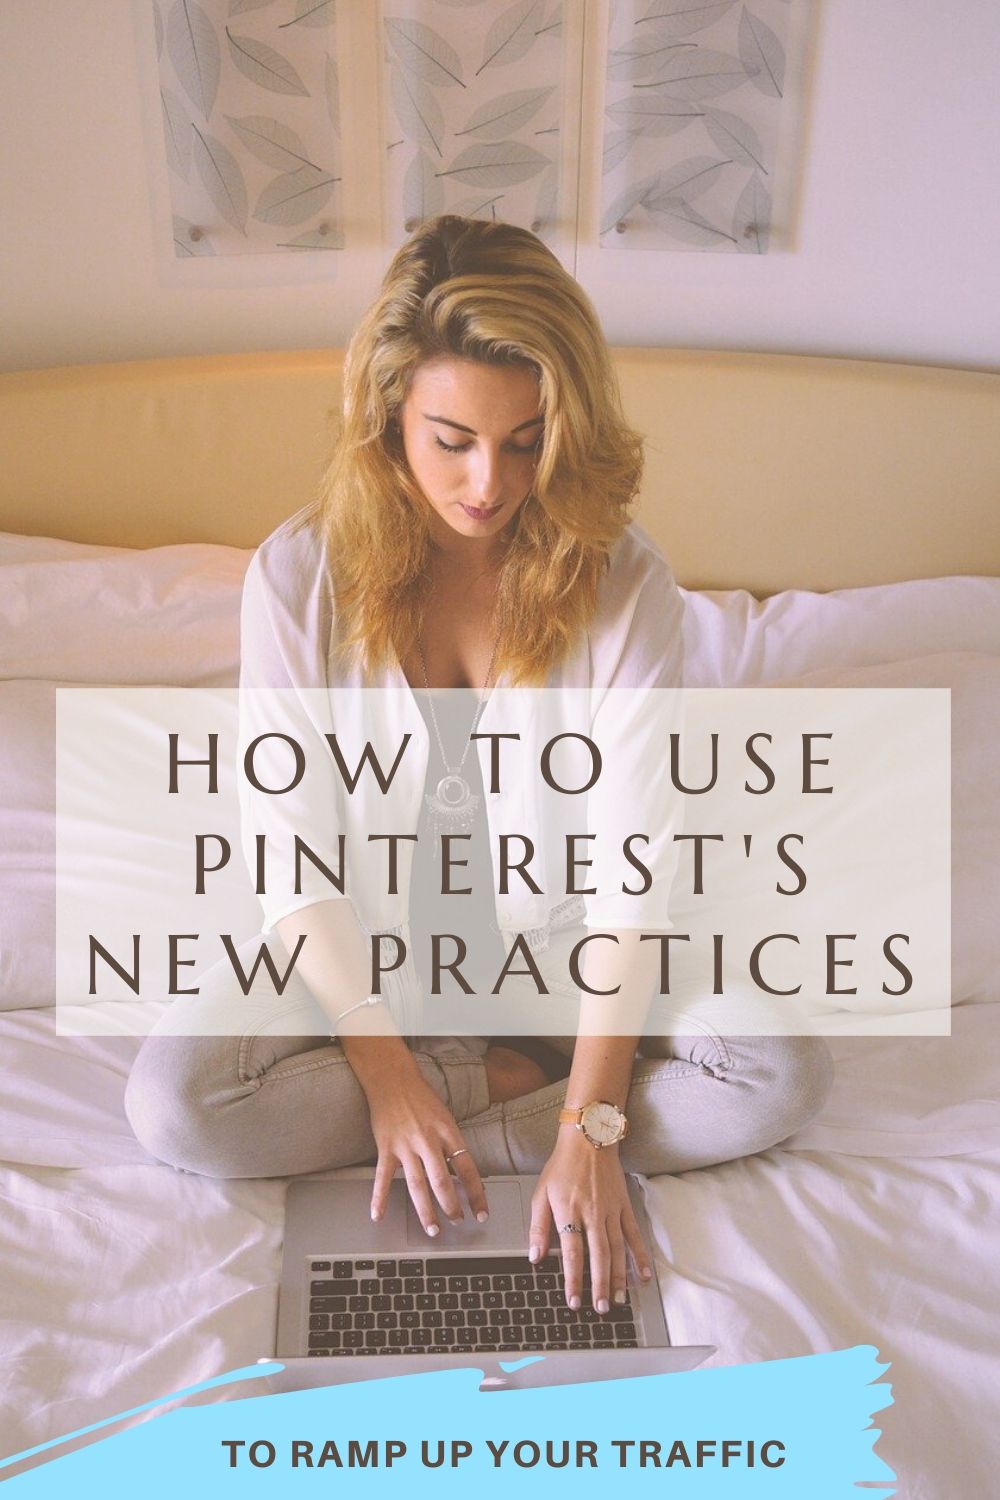 How to Use Pinterest’s New Practices to Ramp Up Your Traffic